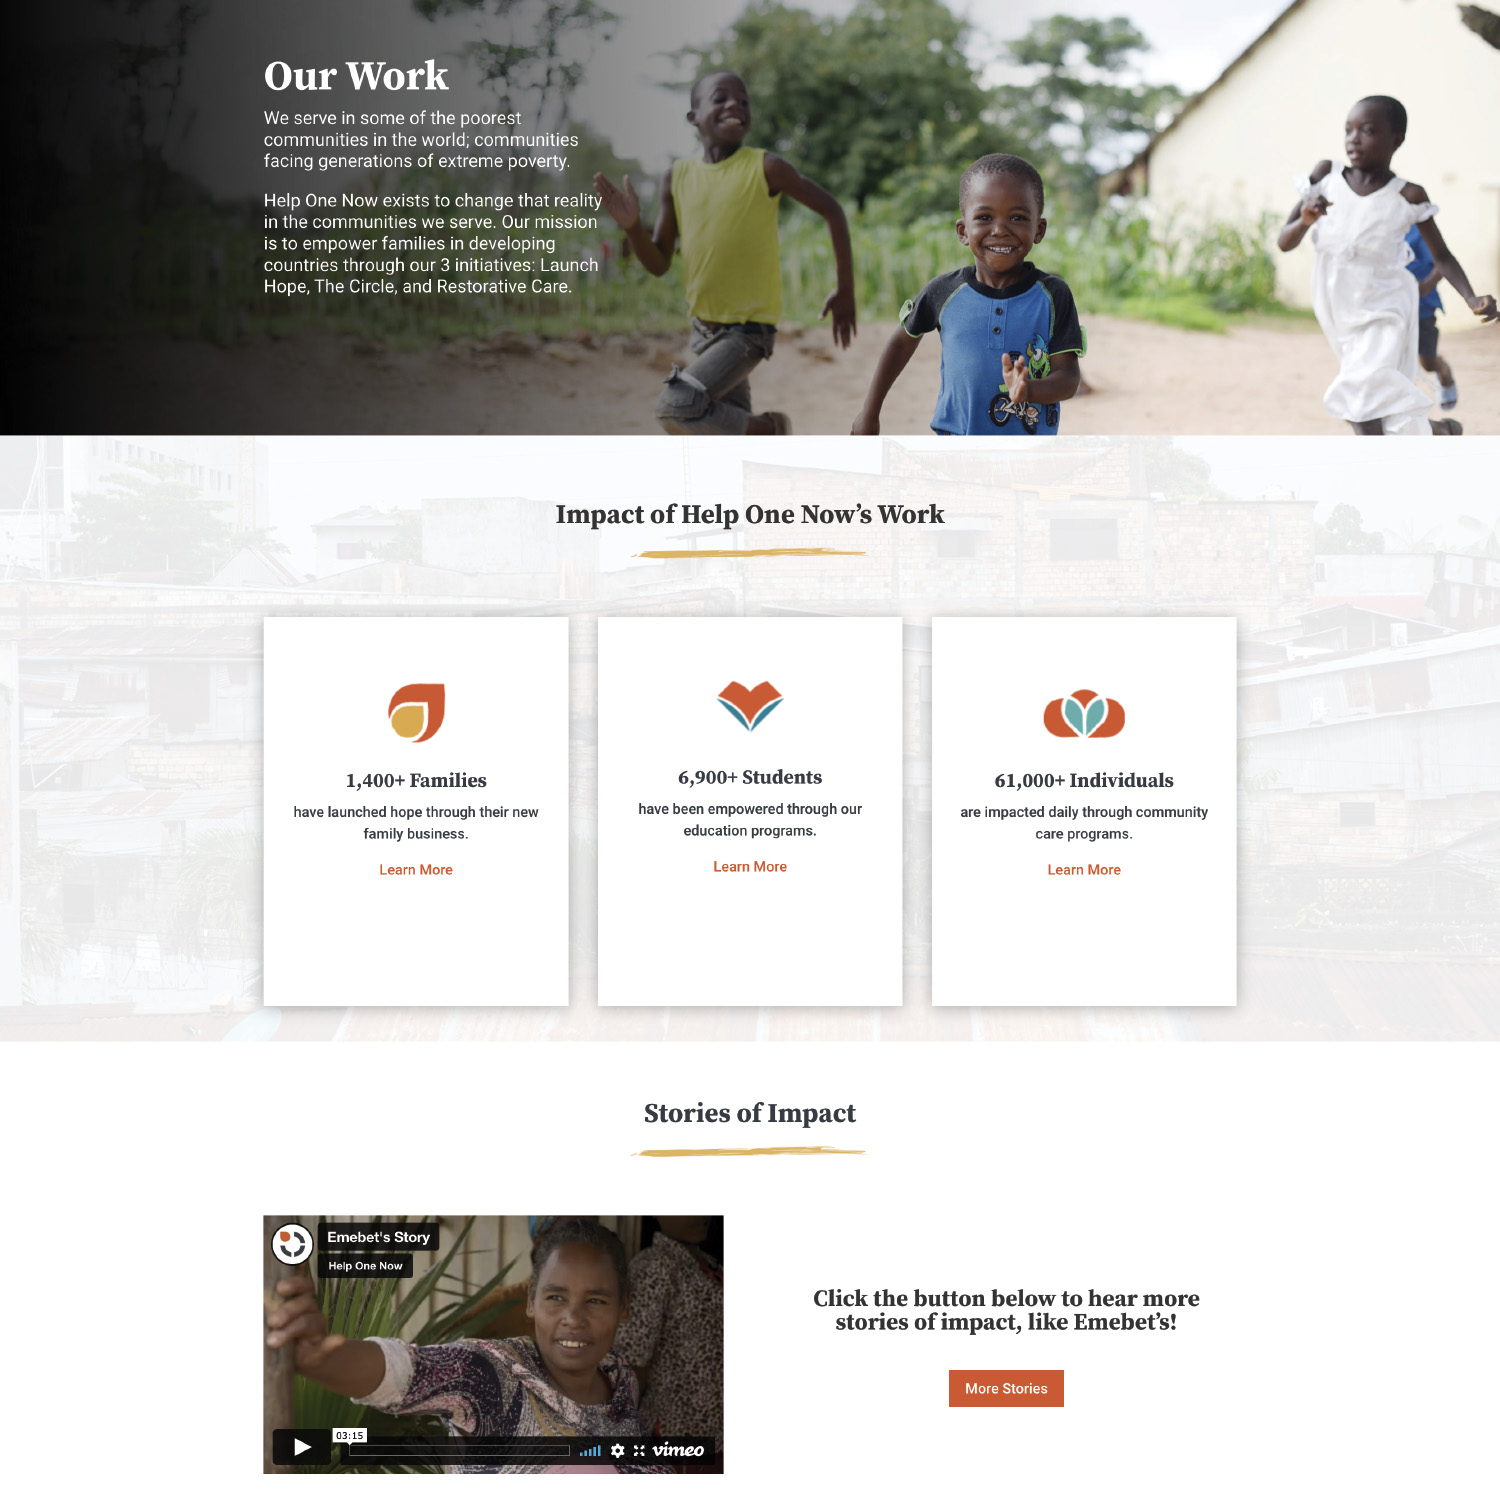 Our Work page of the Help One Now website